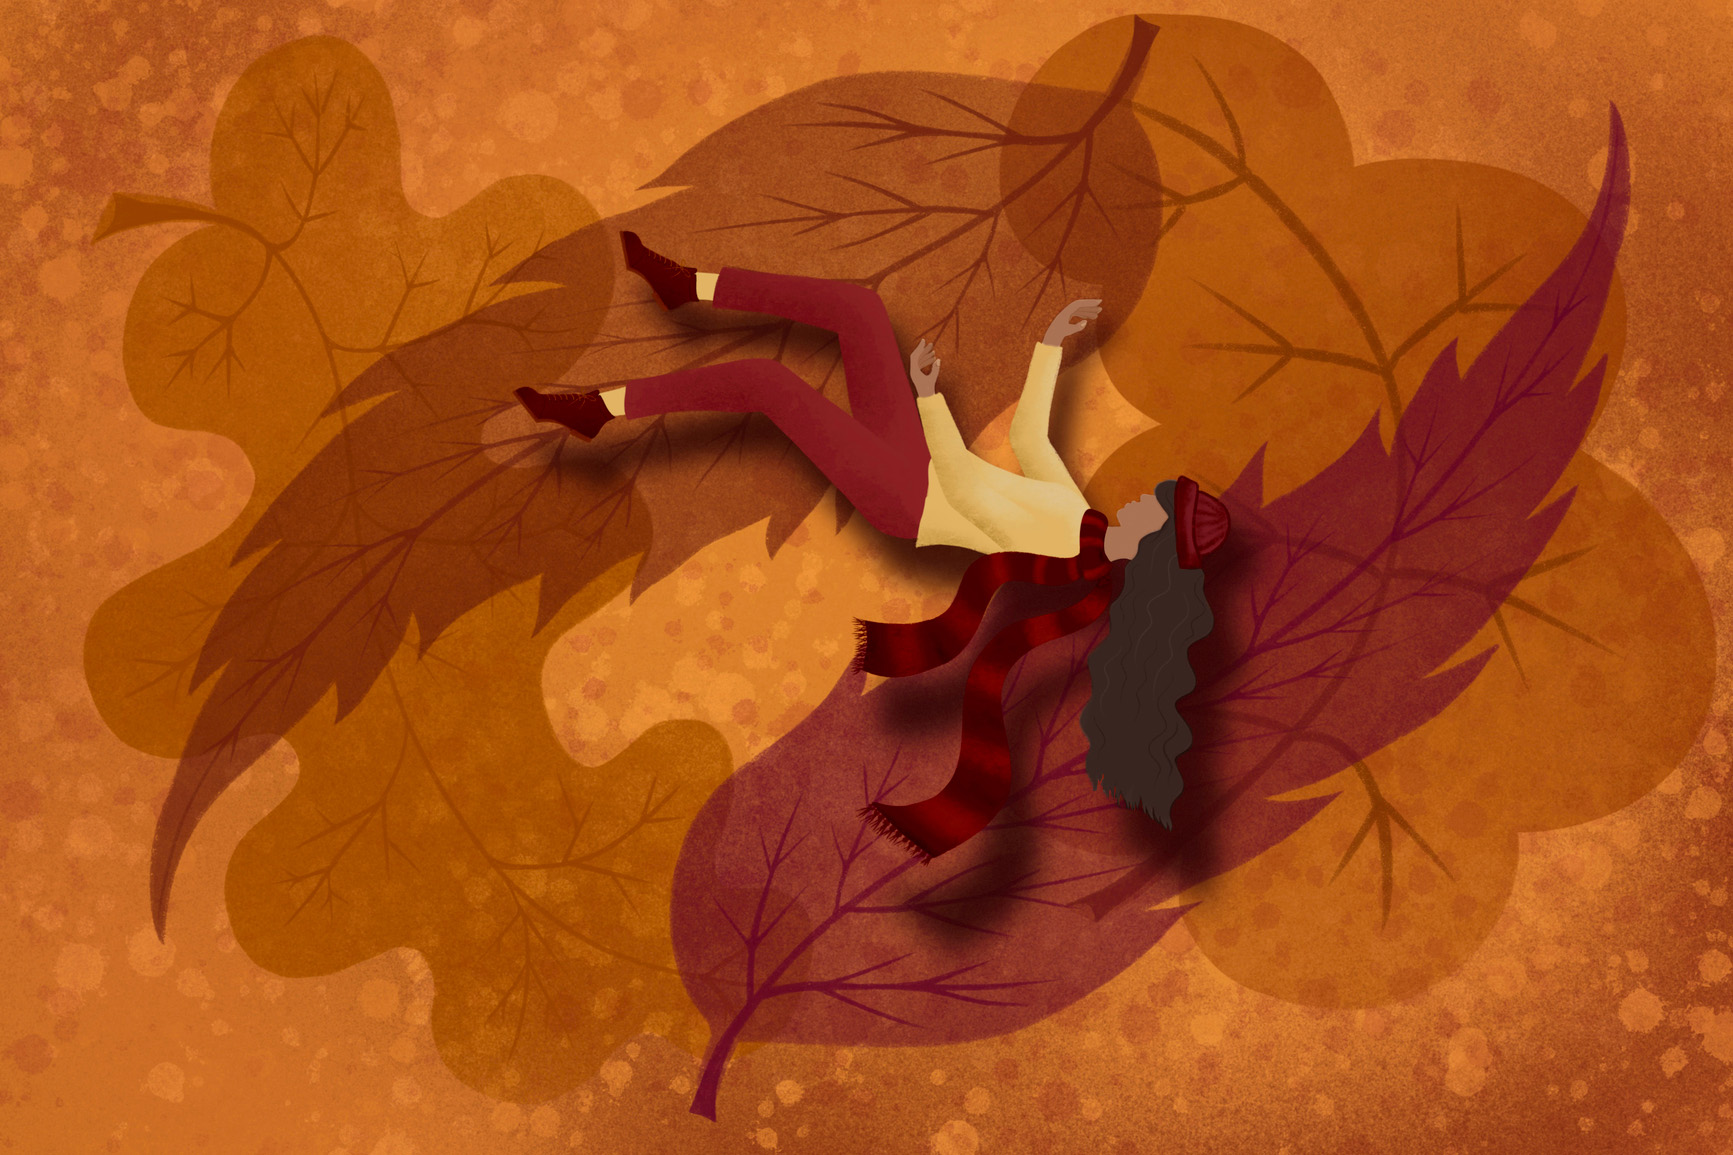 Illustration of a woman in warm autumn clothing and scarf, falling onto fall leaves.